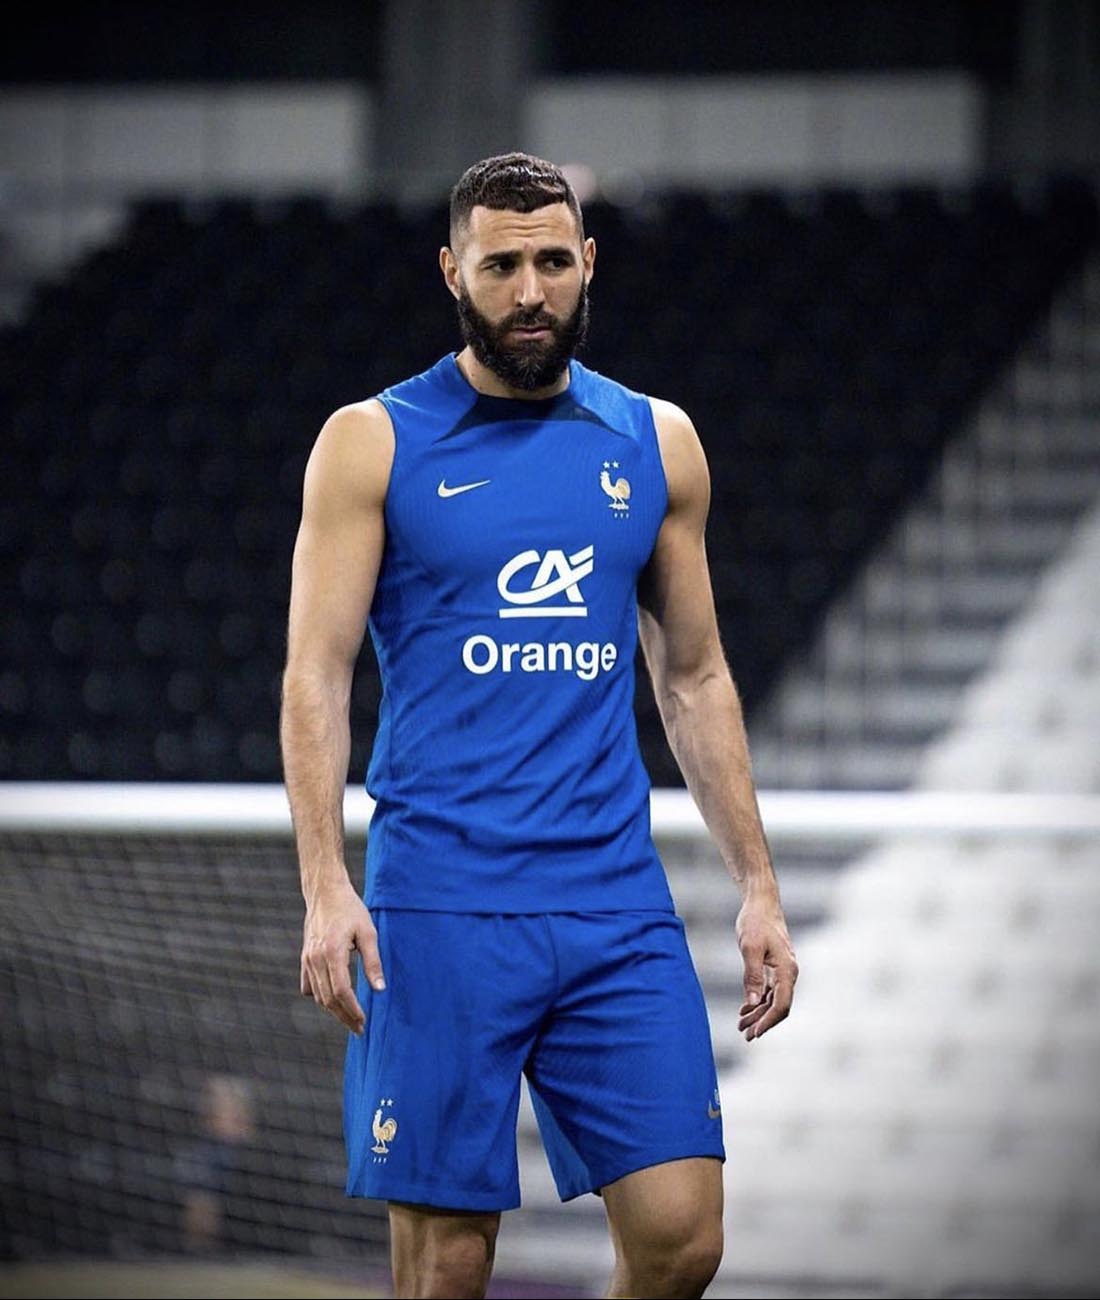 PHOTO: France football star Karim Benzema's dream of playing FIFA World Cup remains unfulfilled